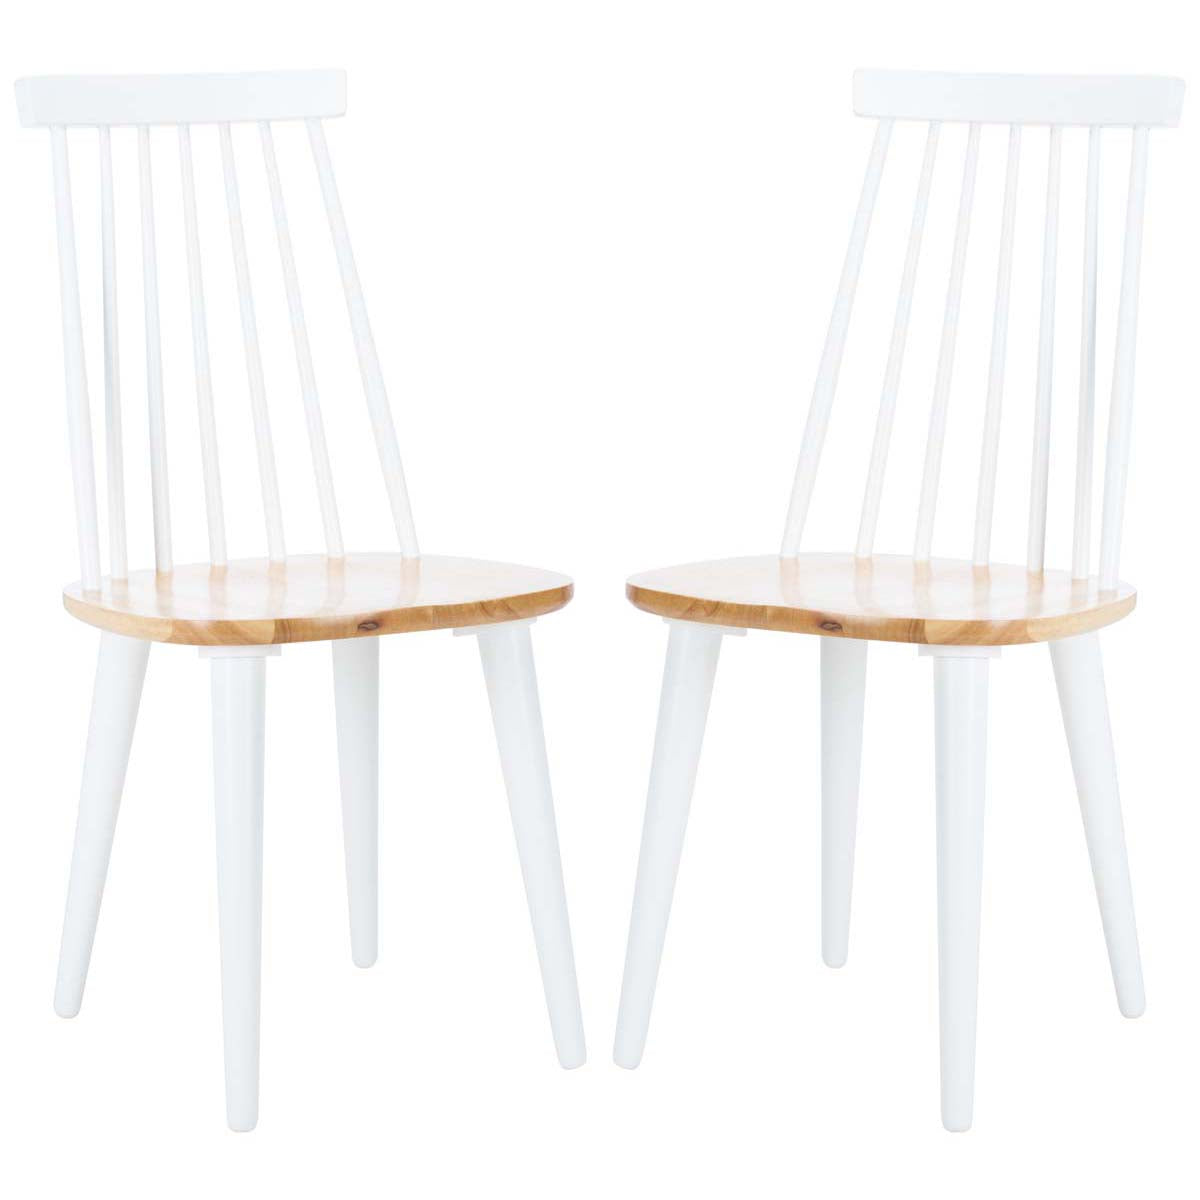 Safavieh Burris 17''H Spindle Side Chair (Set of 2), AMH8511 - White / Natural